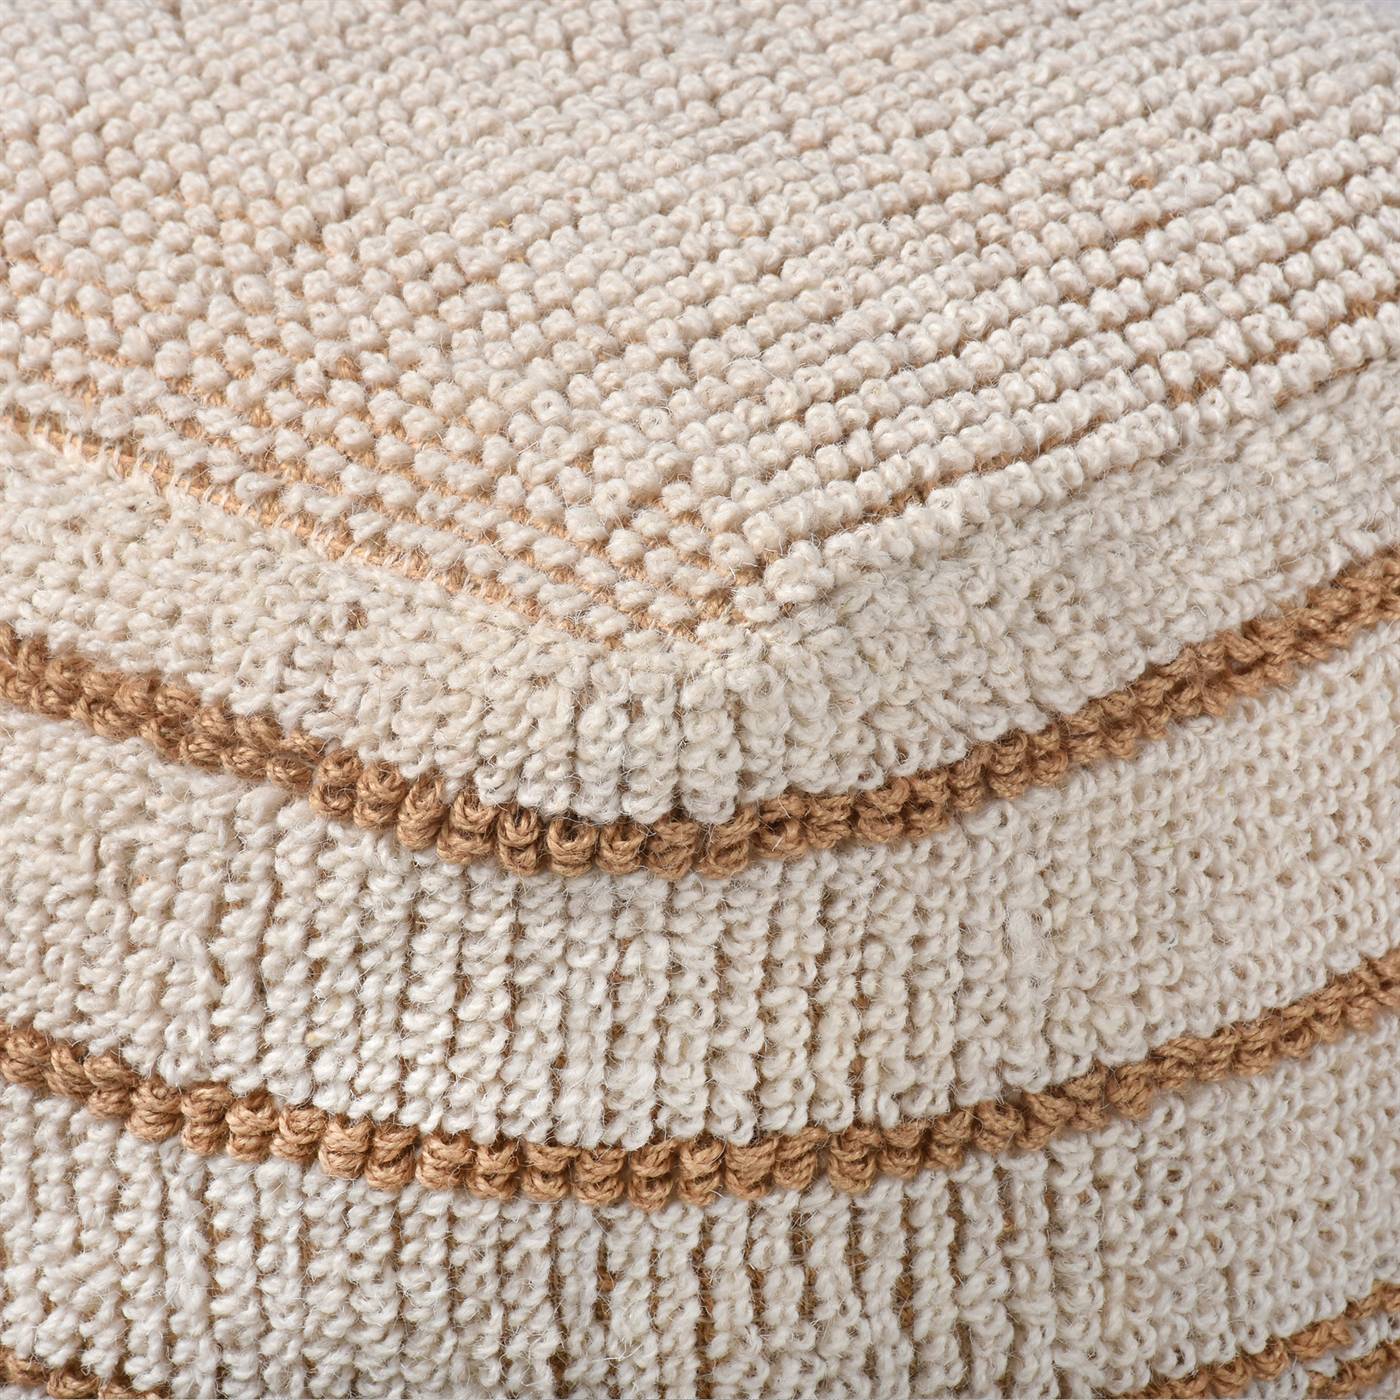 Rylie Pouf, 40x40x40 cm, Natural, Natural White, Jute, Wool, Hand Woven, Handwoven, All Loop